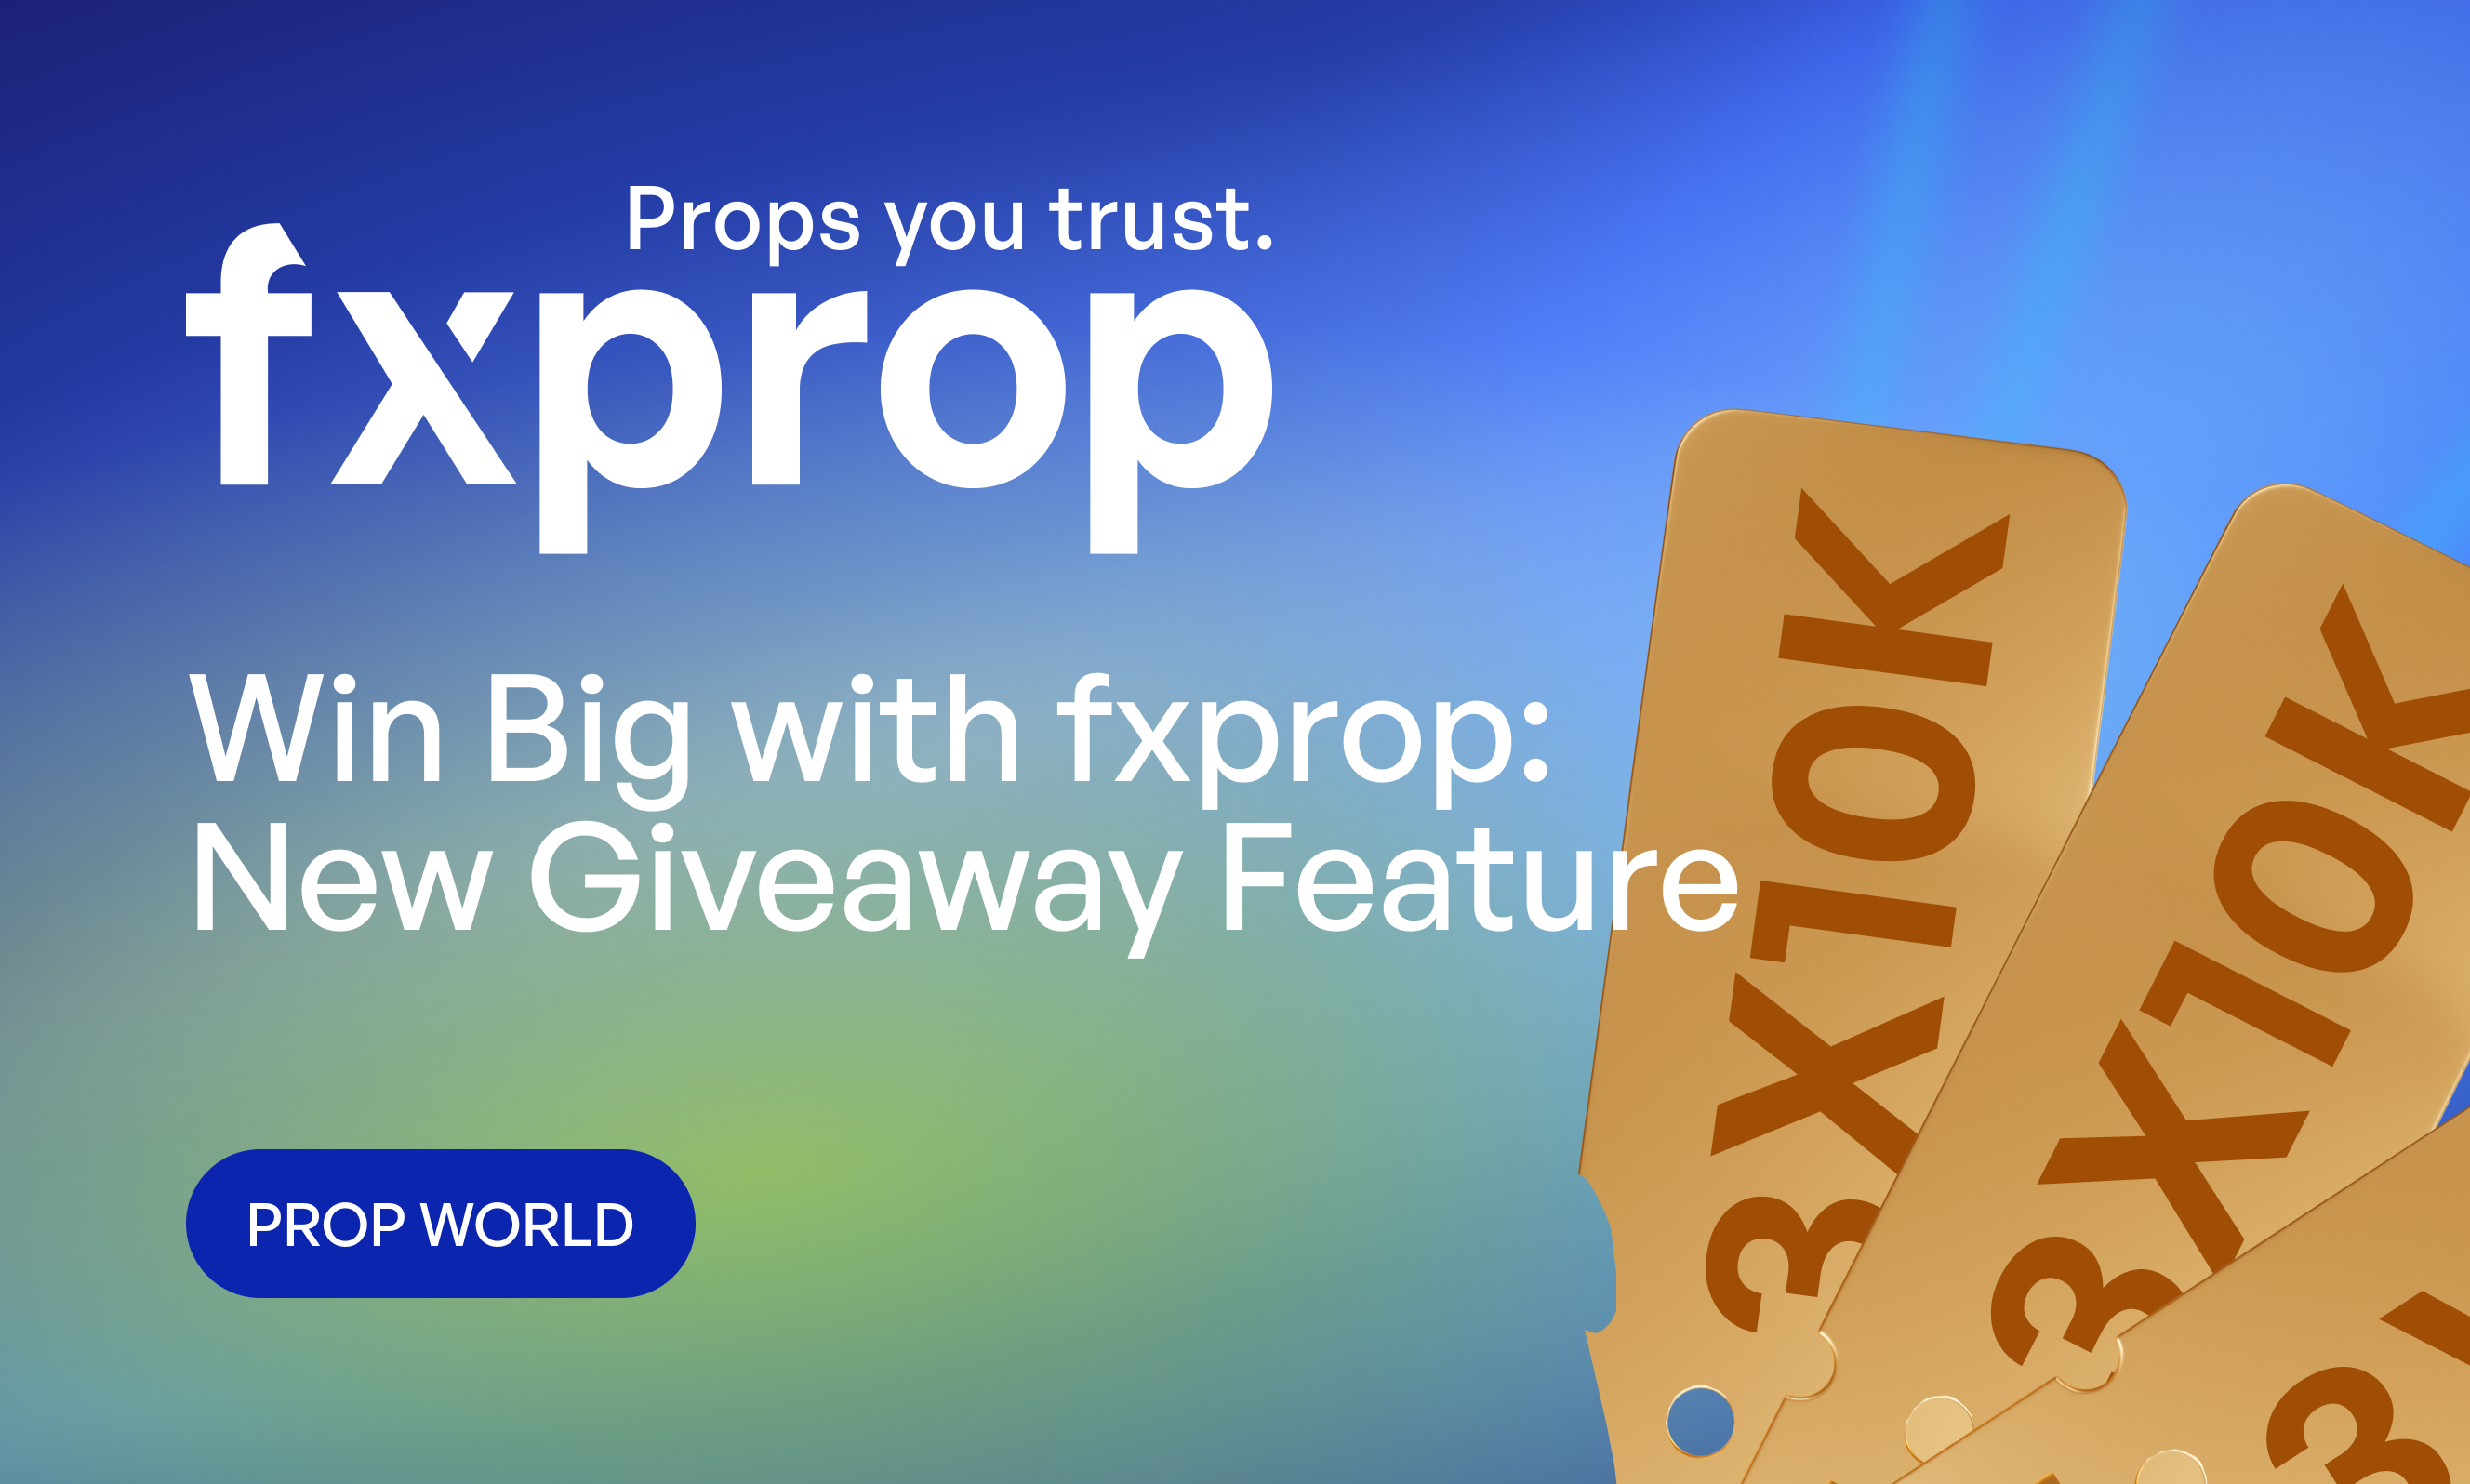 Win Big with fxprop: New Giveaway Feature